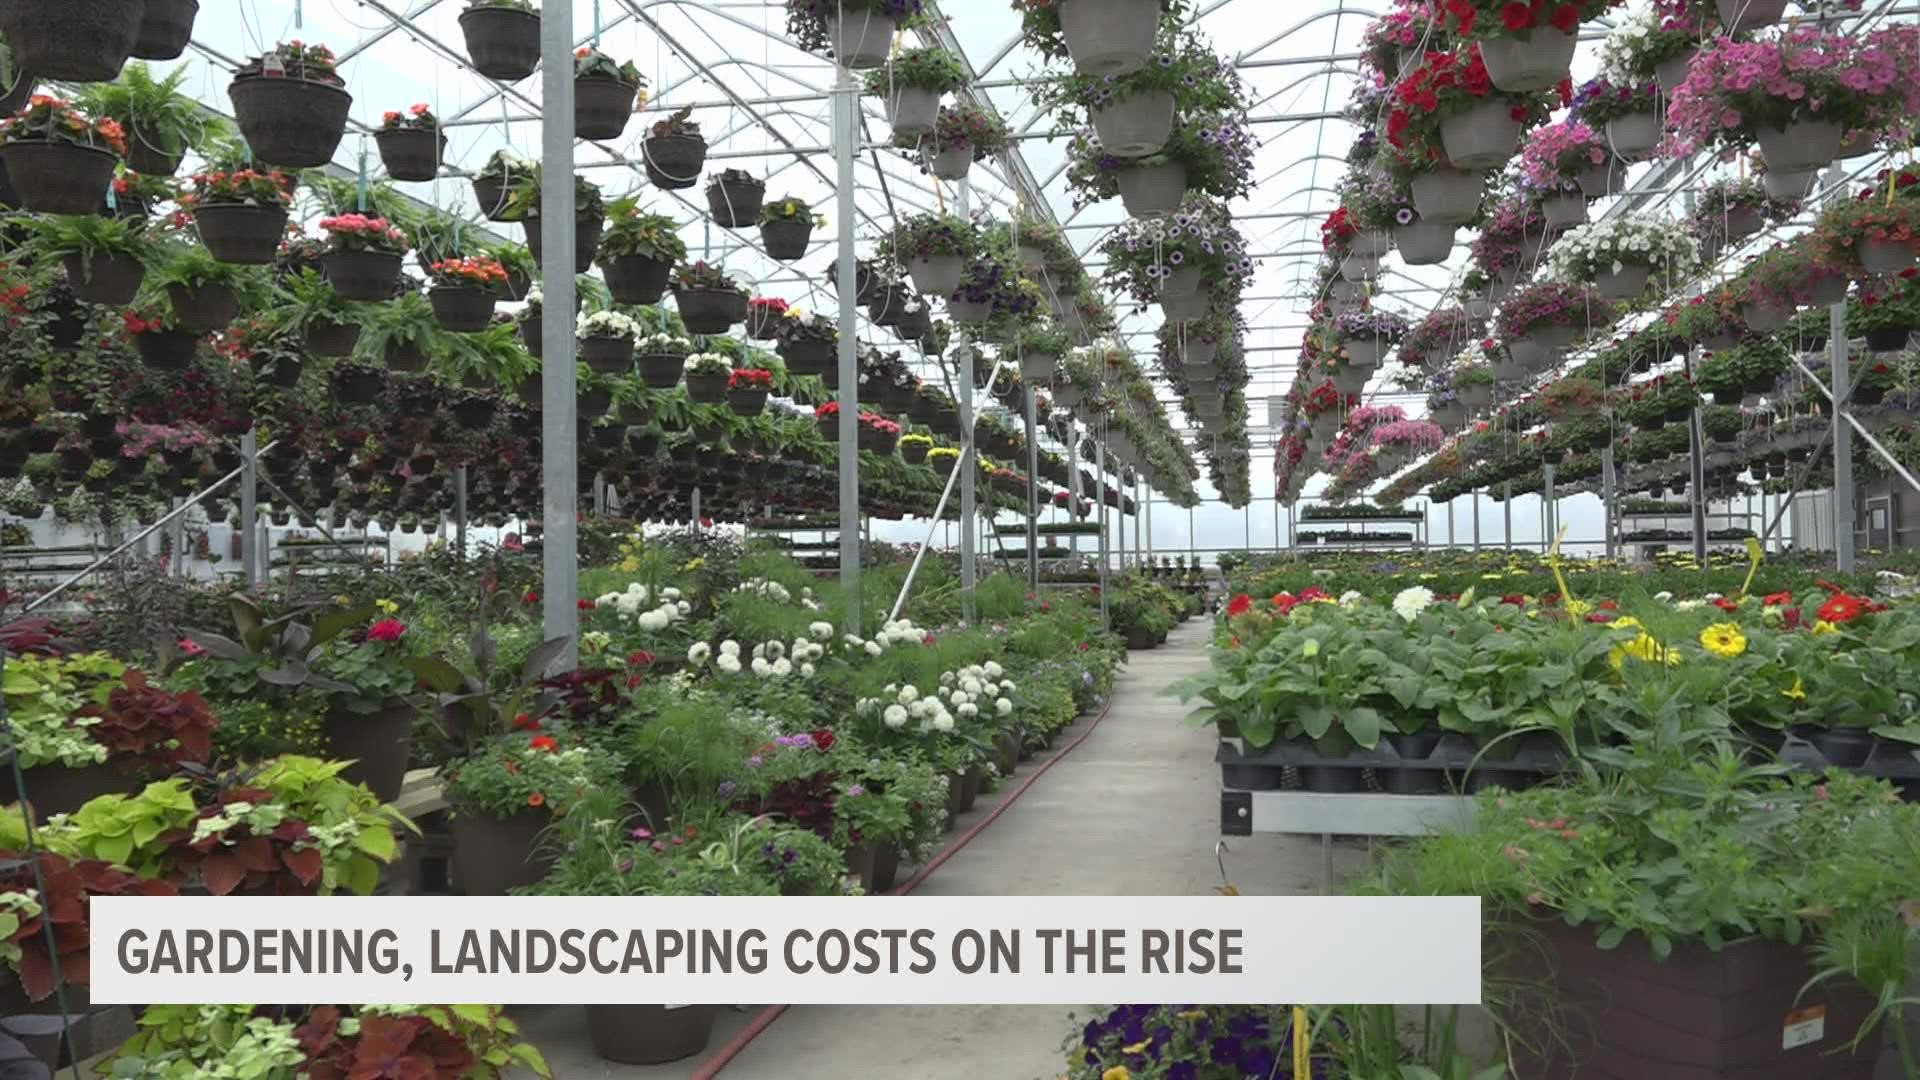 Labor shortages, supply chain challenges, and inflation force greenhouses and other businesses to increase prices.